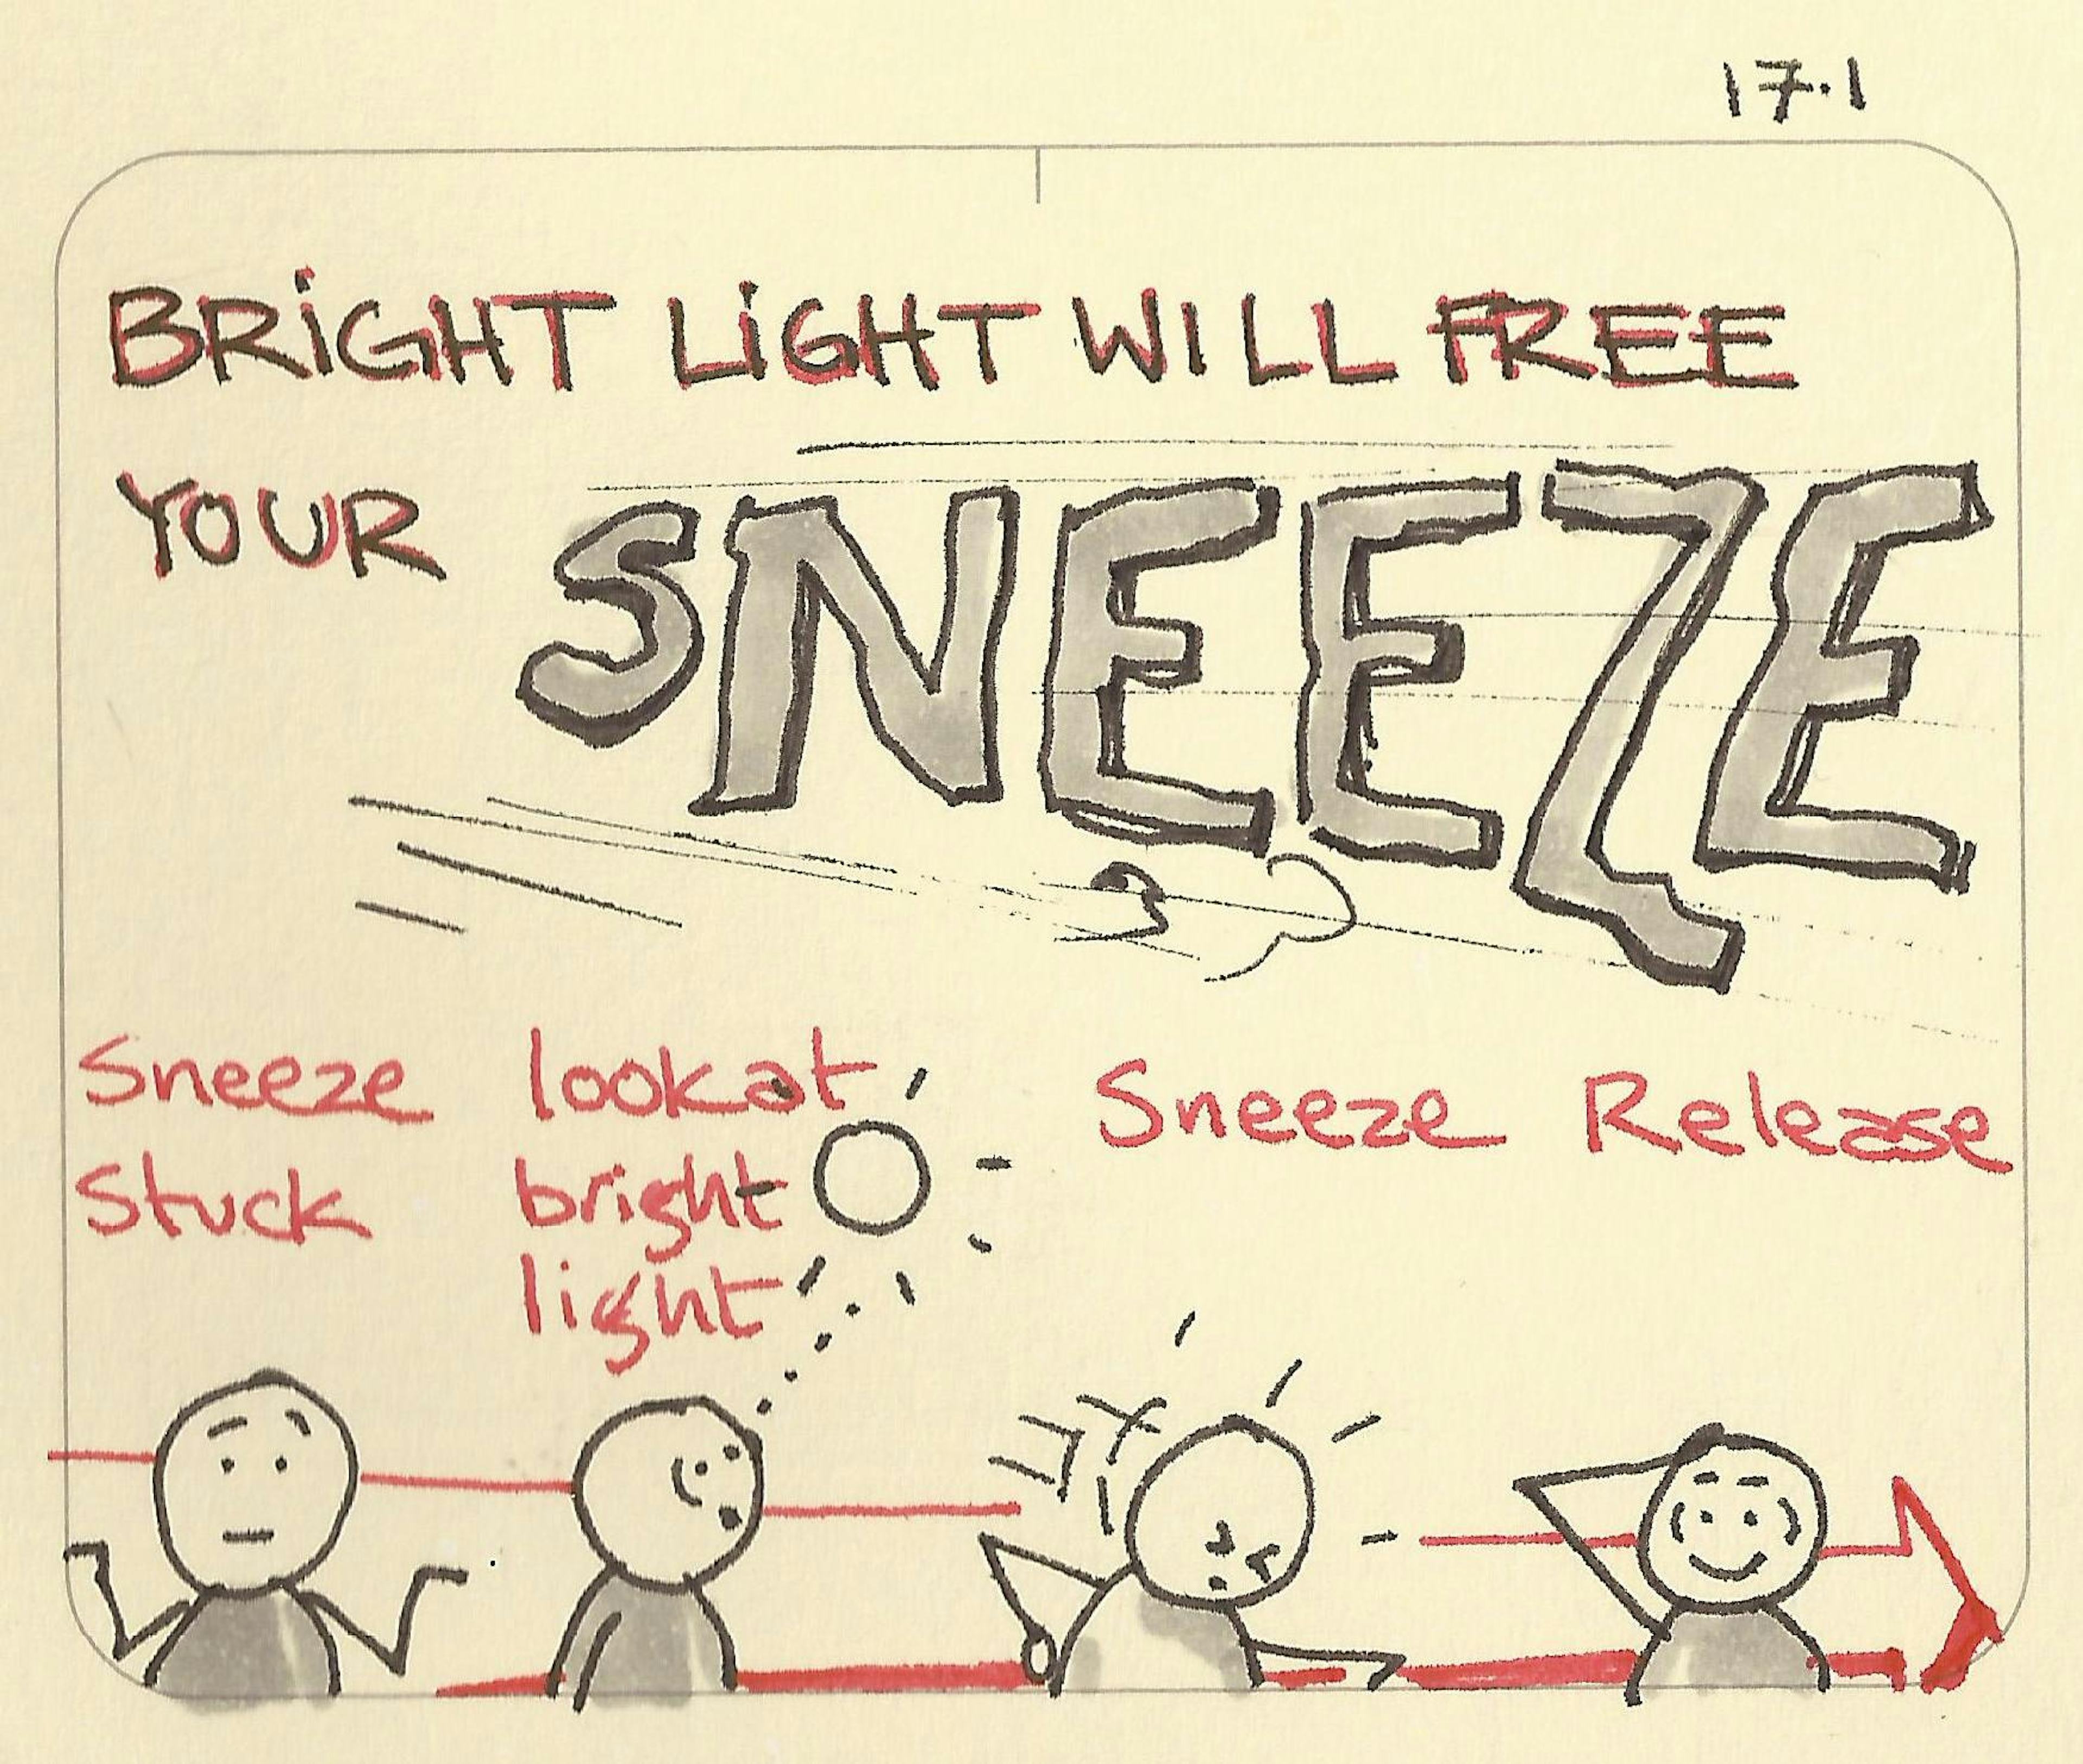 Bright light will free your sneeze illustration: showing the photic sneeze when a person has a sneeze stuck and releases it by looking at a bright light